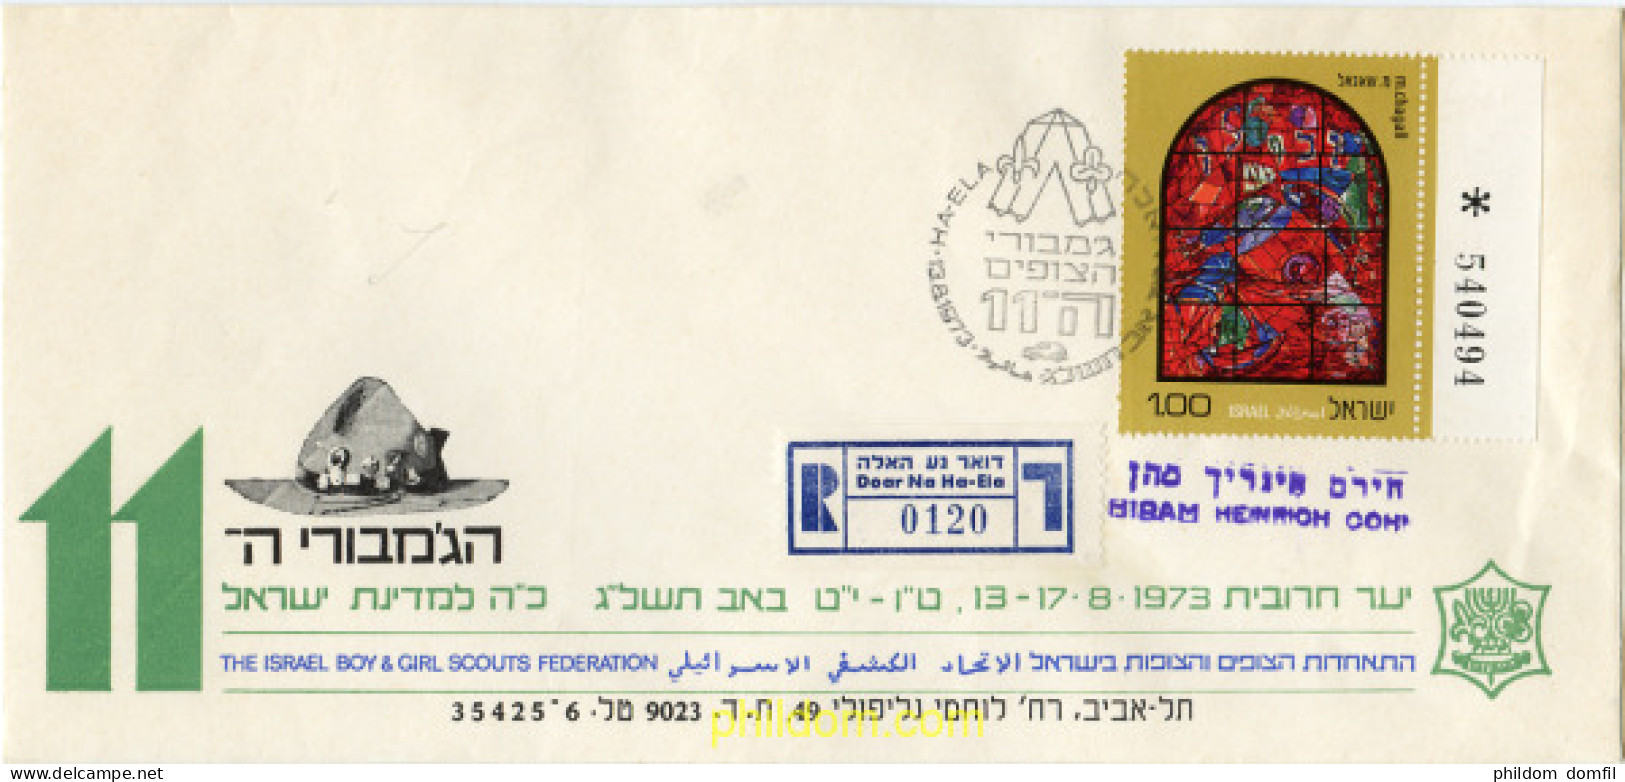 265768 USED ISRAEL 1973 VIDRIERAS DE MARC CHAGALL - Unused Stamps (without Tabs)